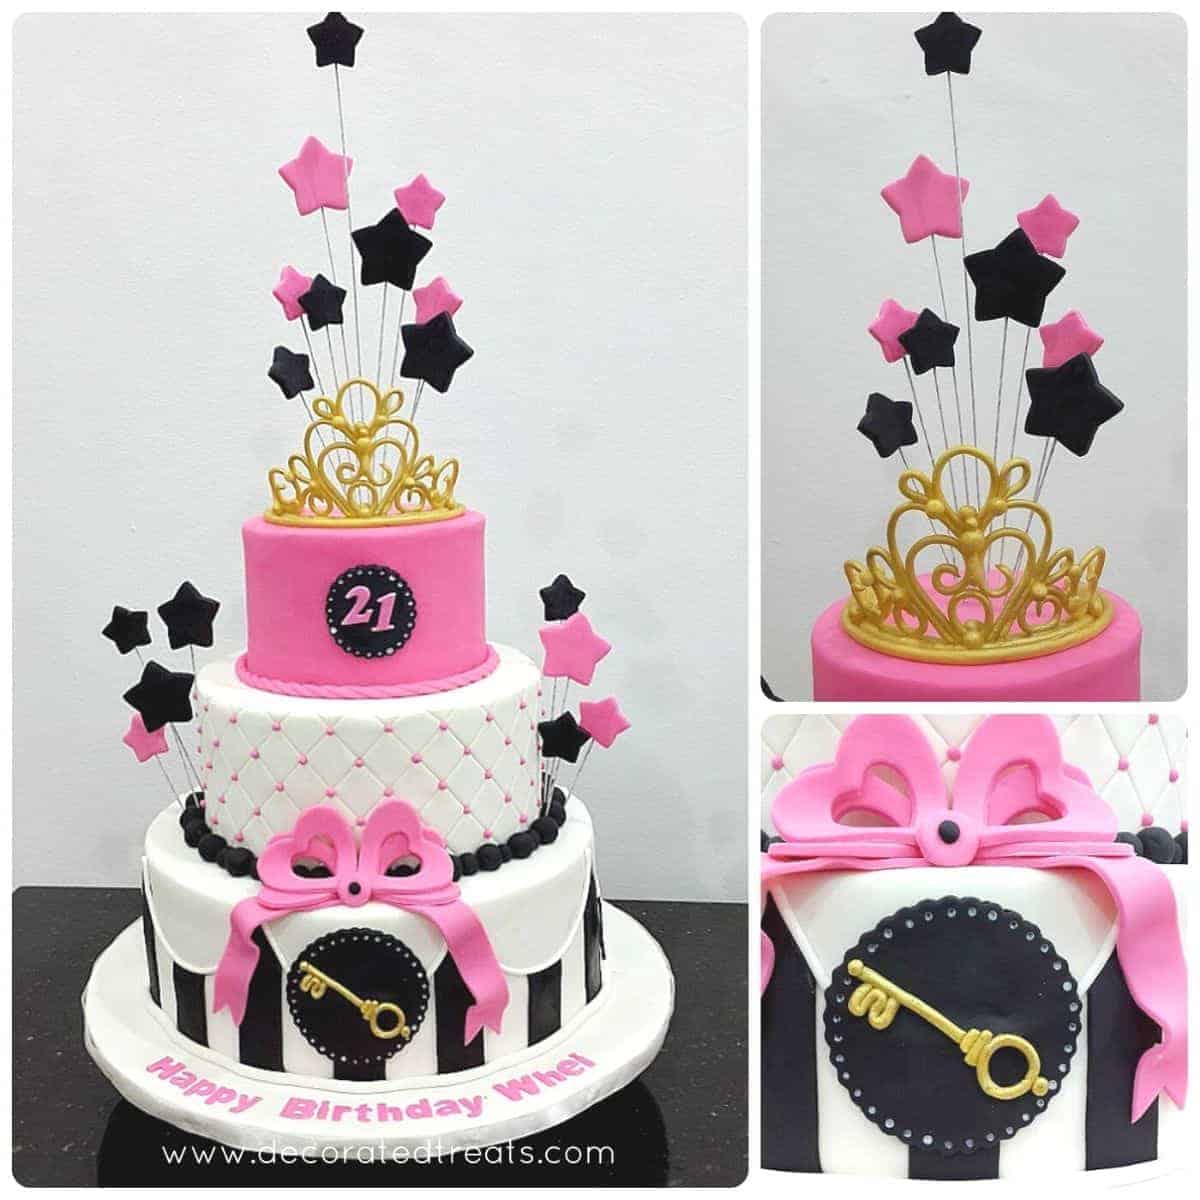 Poster for a pink 21st birthday cake